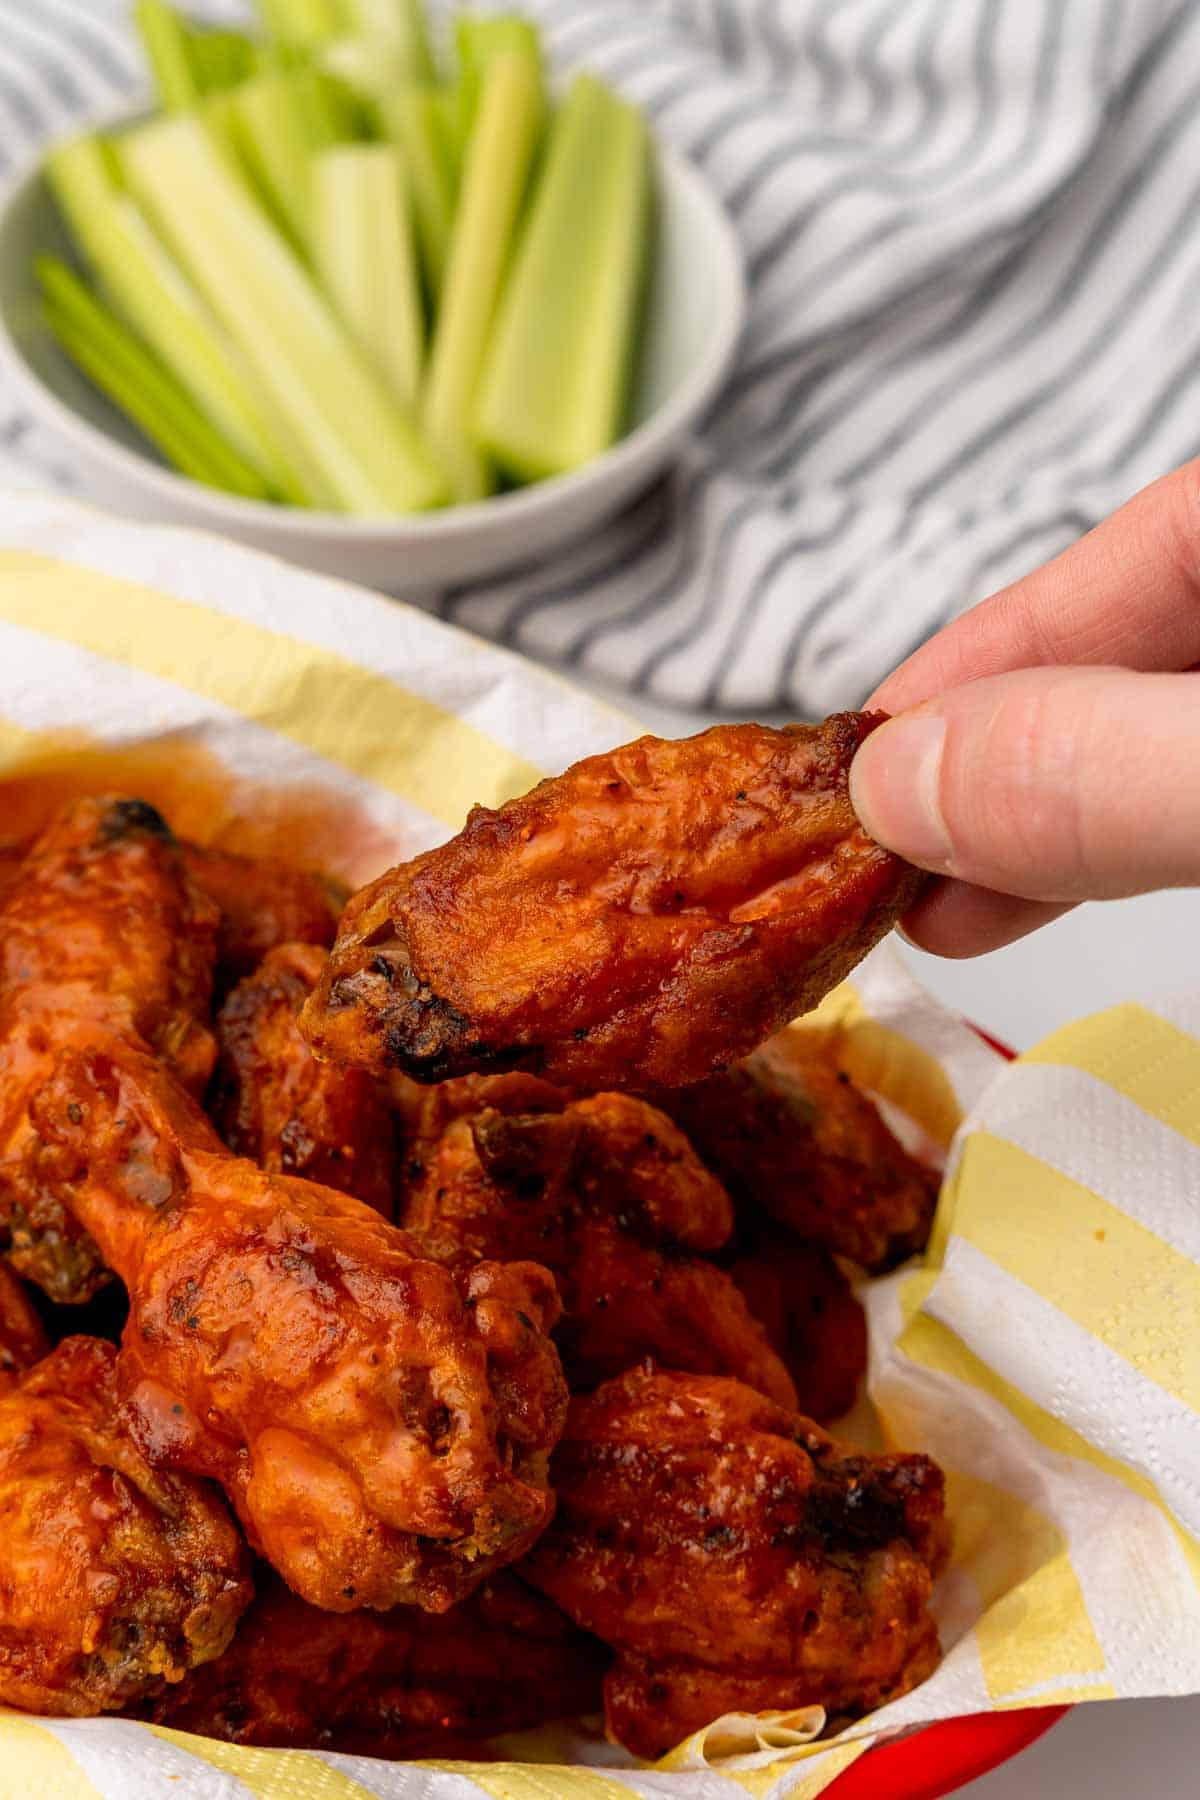 Hand taking a Carolina chicken wing from a plate of wings